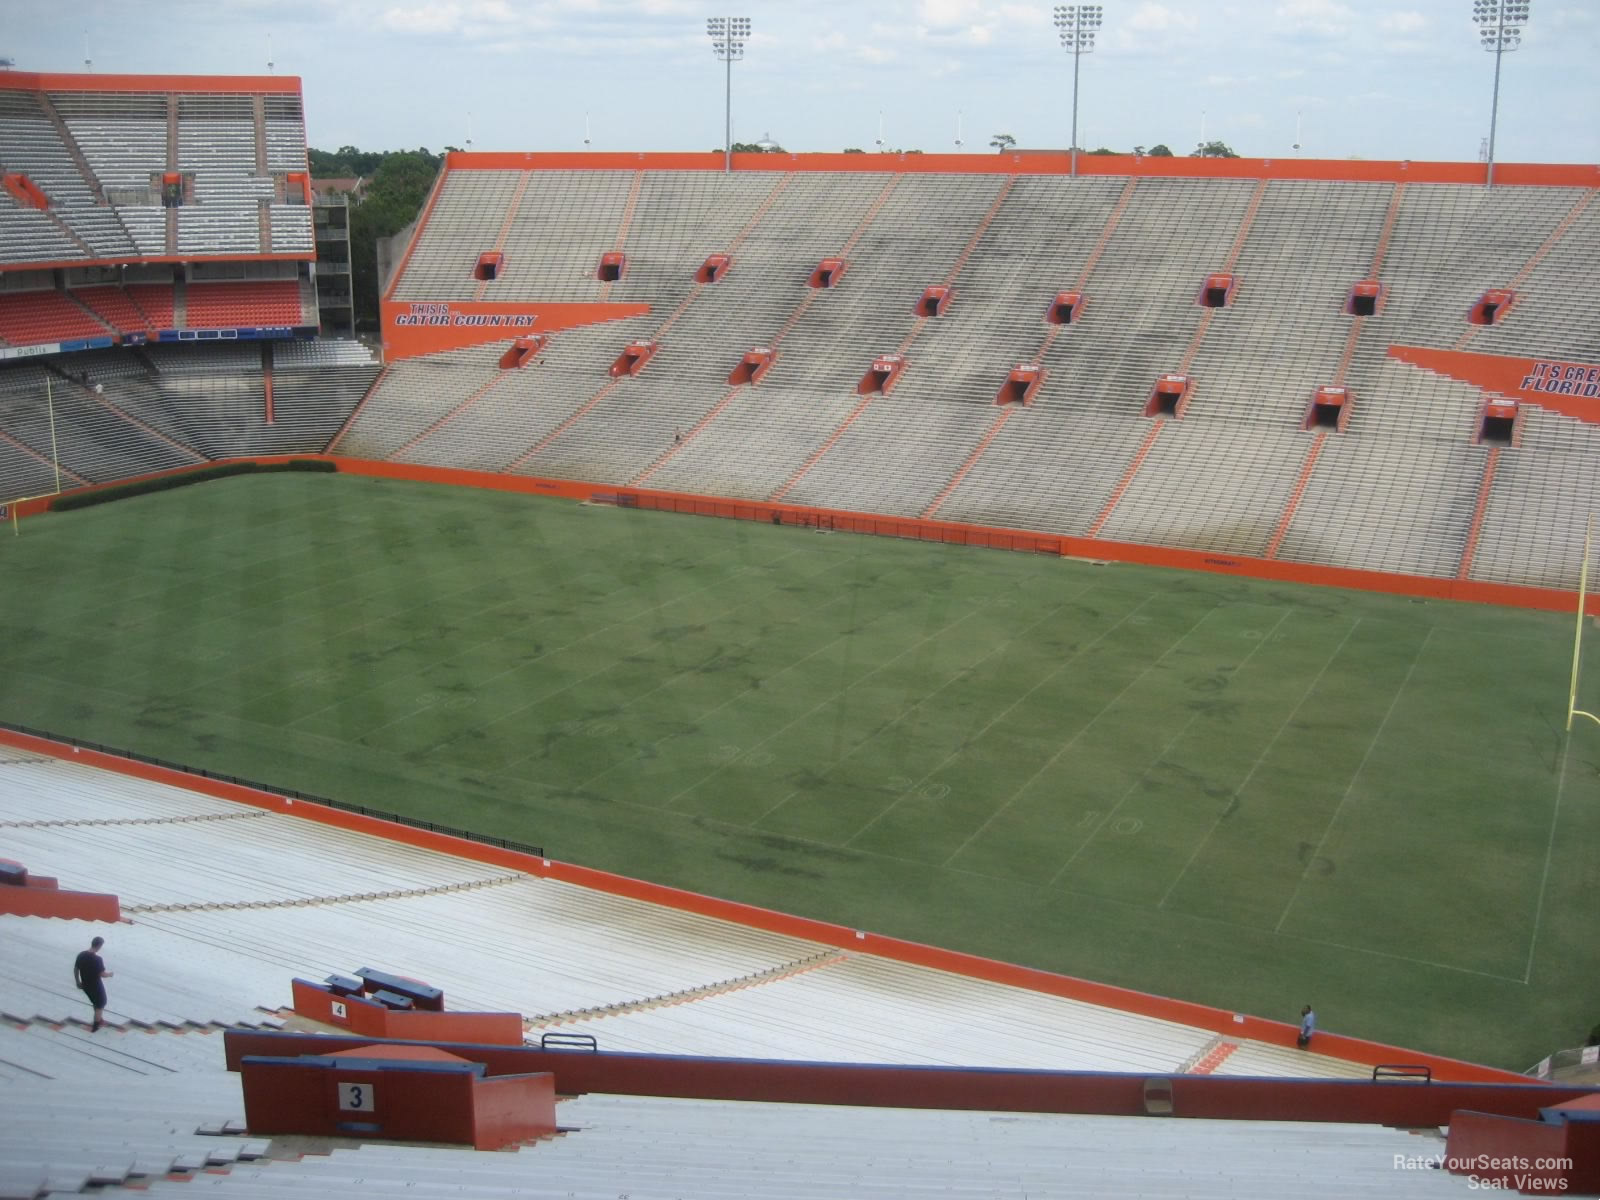 section 3, row 88 seat view  - ben hill griffin stadium